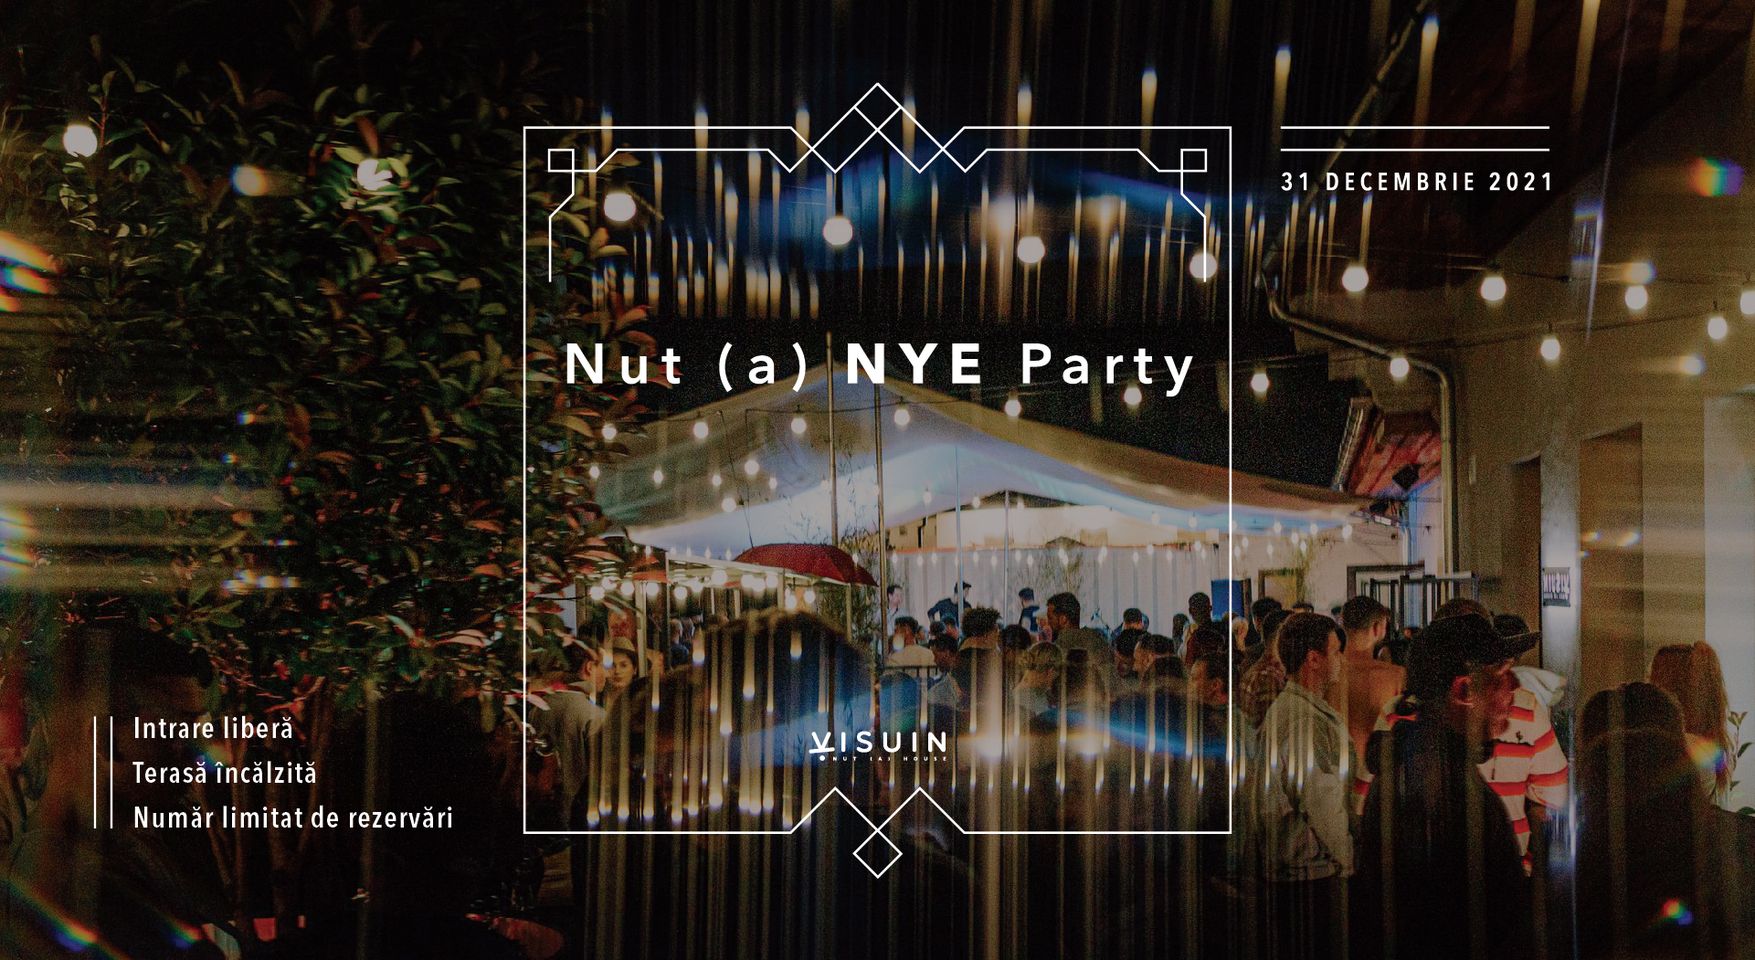 Nut (a) NYE Party